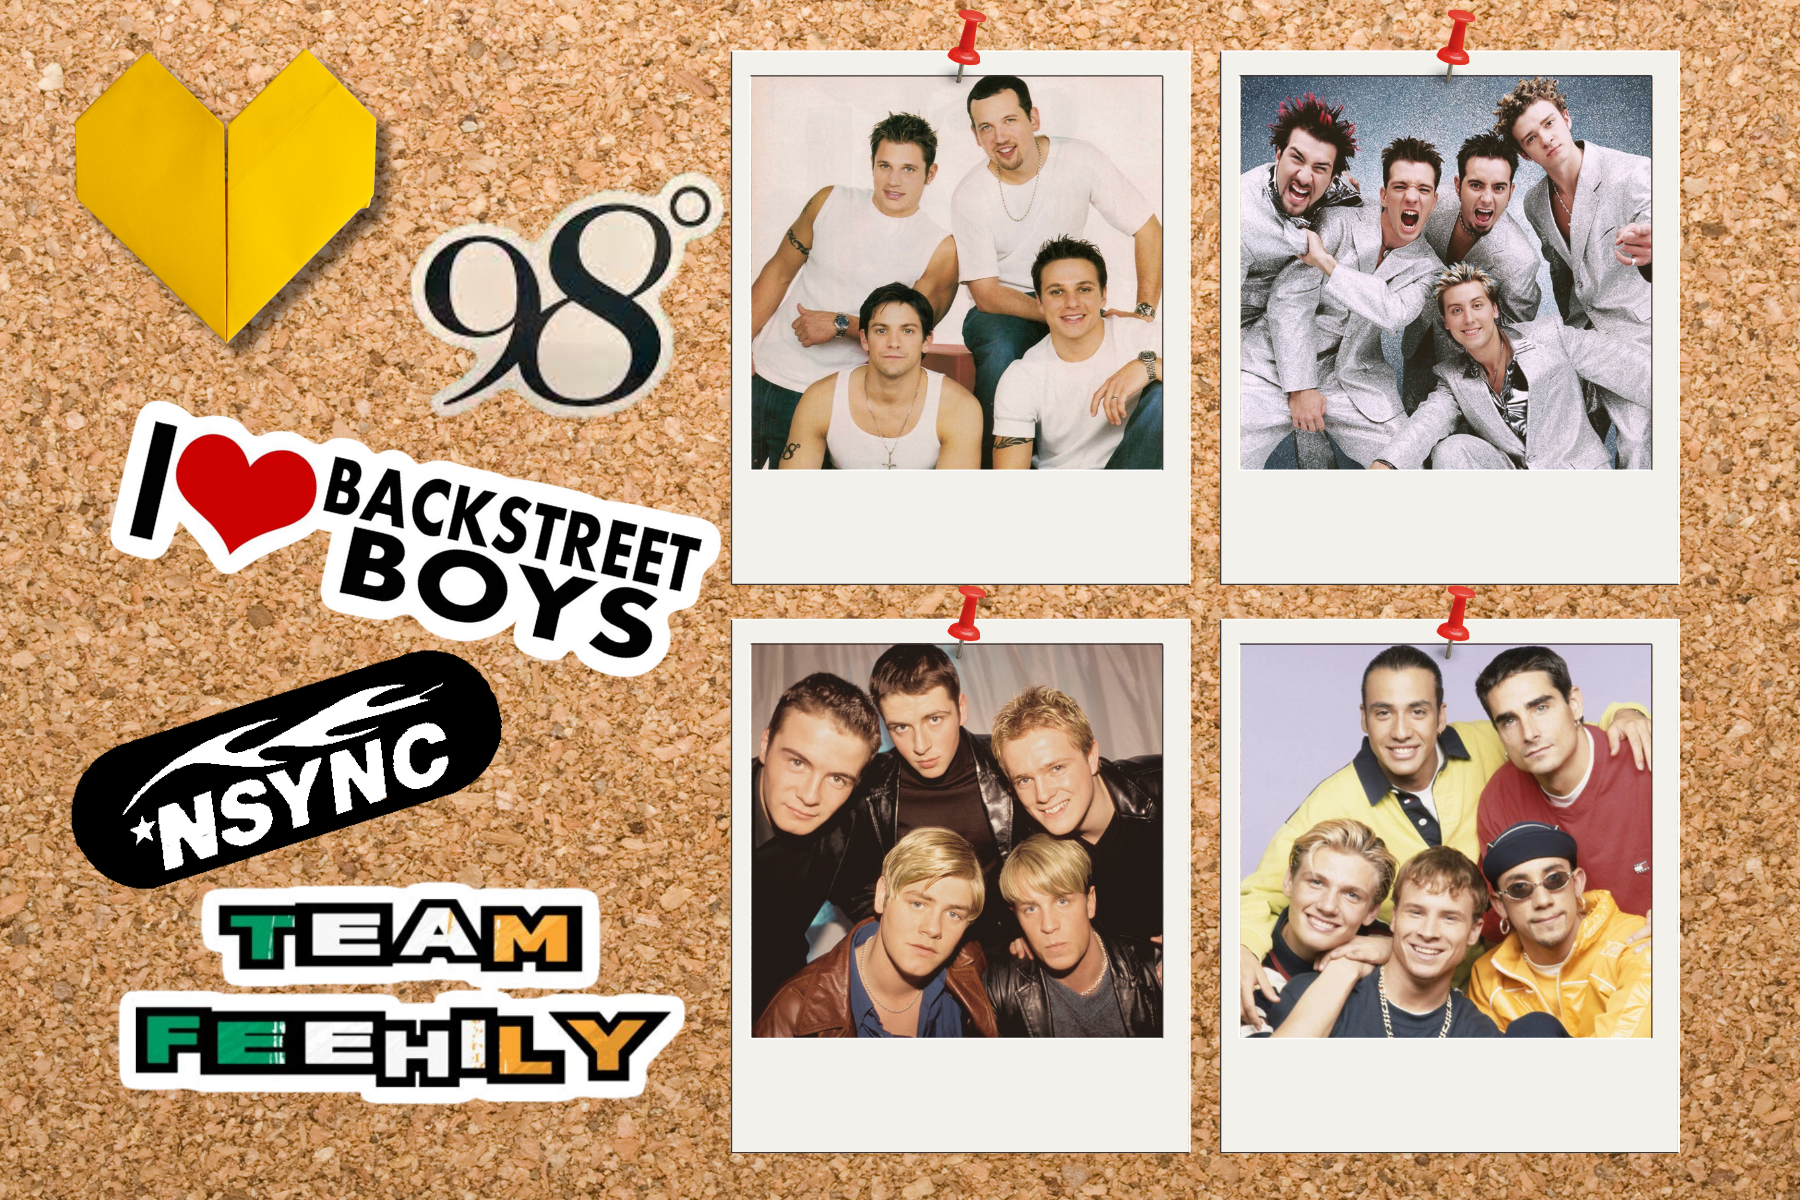 Can You Guess the Millennium Boy Band Based on the Lyrics?